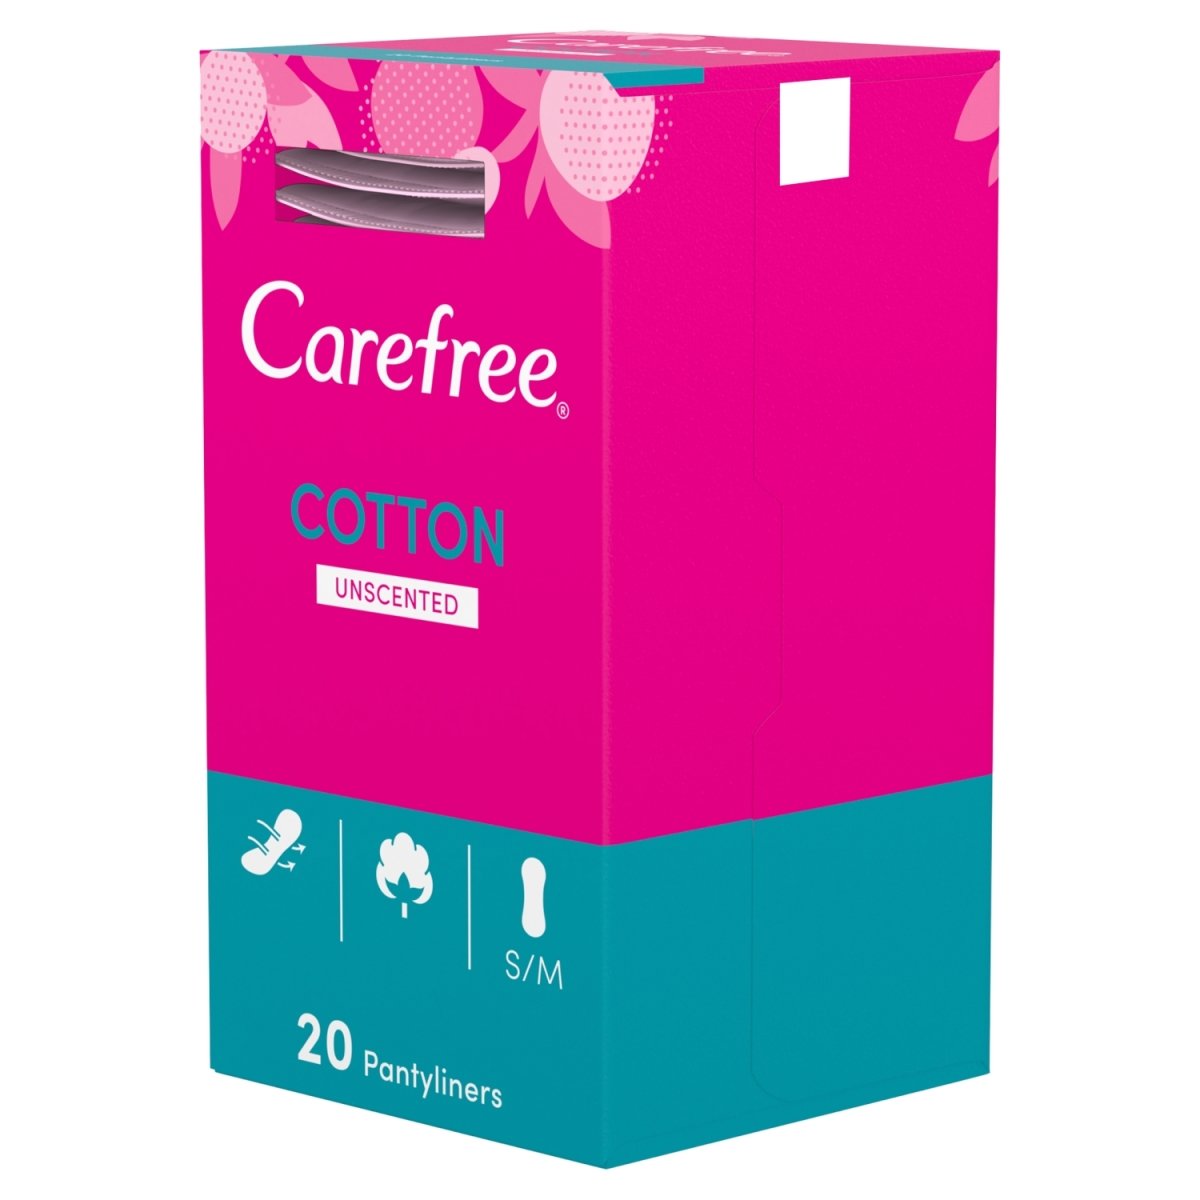 Carefree Breathable Panty Liners 20s - Intamarque 3574660038408